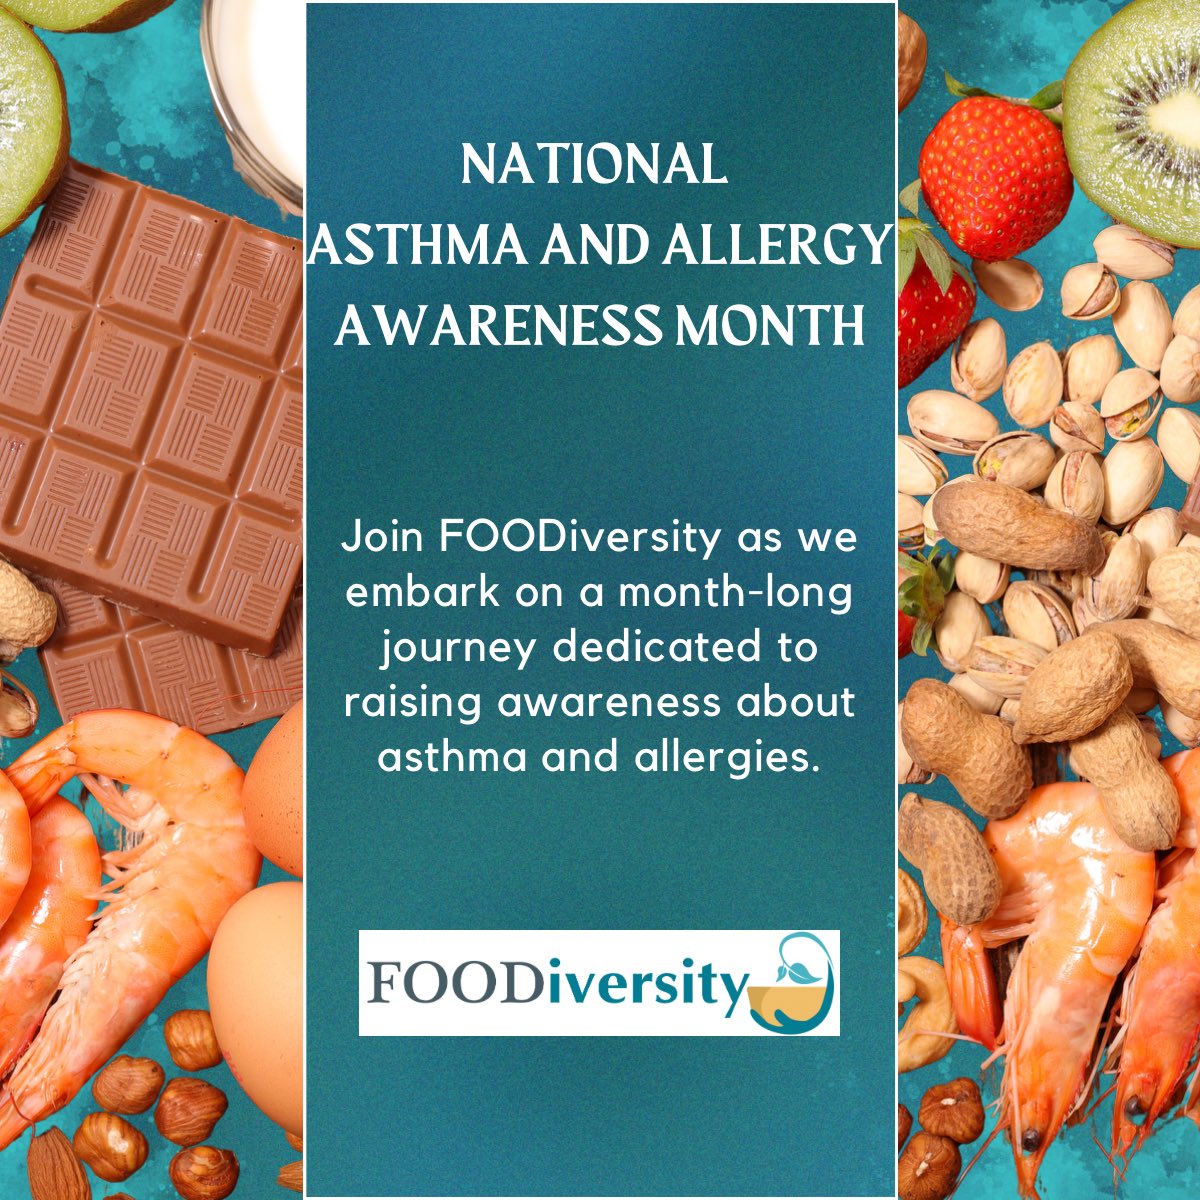 Get a “shoutout!” Start a FOODiversity fundraiser. Tag FOODiversity in your posts. Use YOUR VOICE to make life easier for those with food allergy, celiac, food intolerances. Then, see your name “in lights!” #AAAM2024 #foodallergies #SafeFOODsCostMore